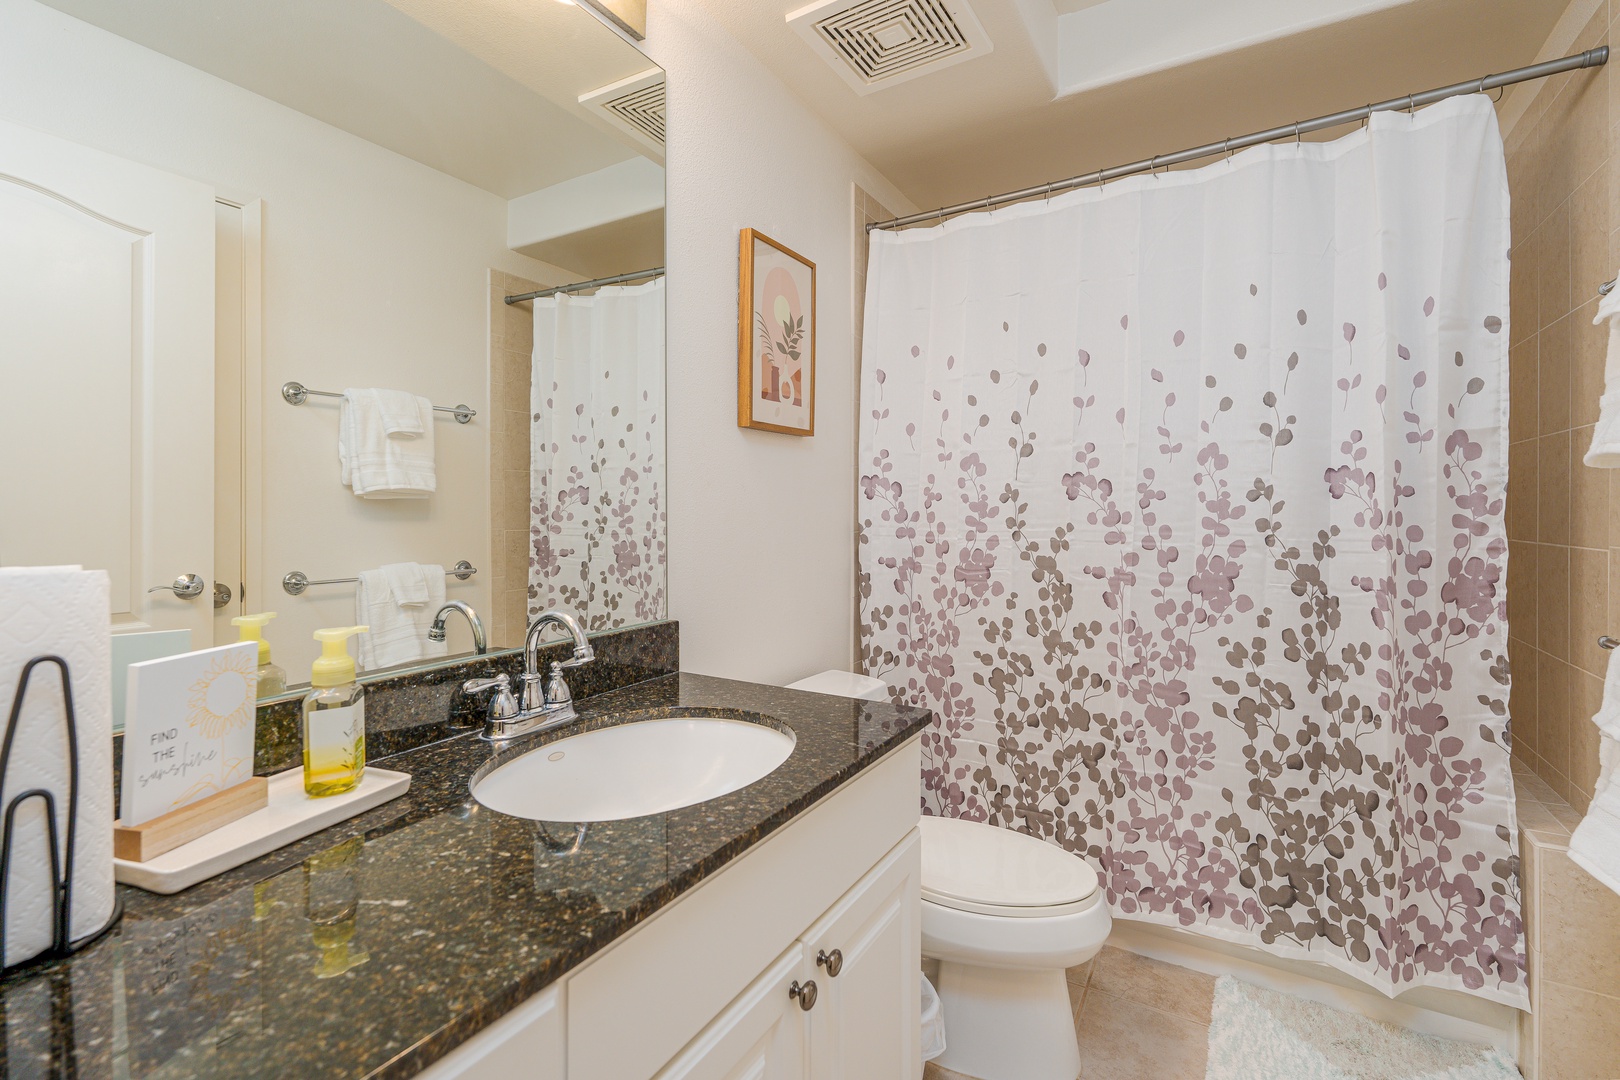 Kapolei Vacation Rentals, Ko Olina Kai 1105F - The ensuite bathroom with a single sink and a walk-in shower.